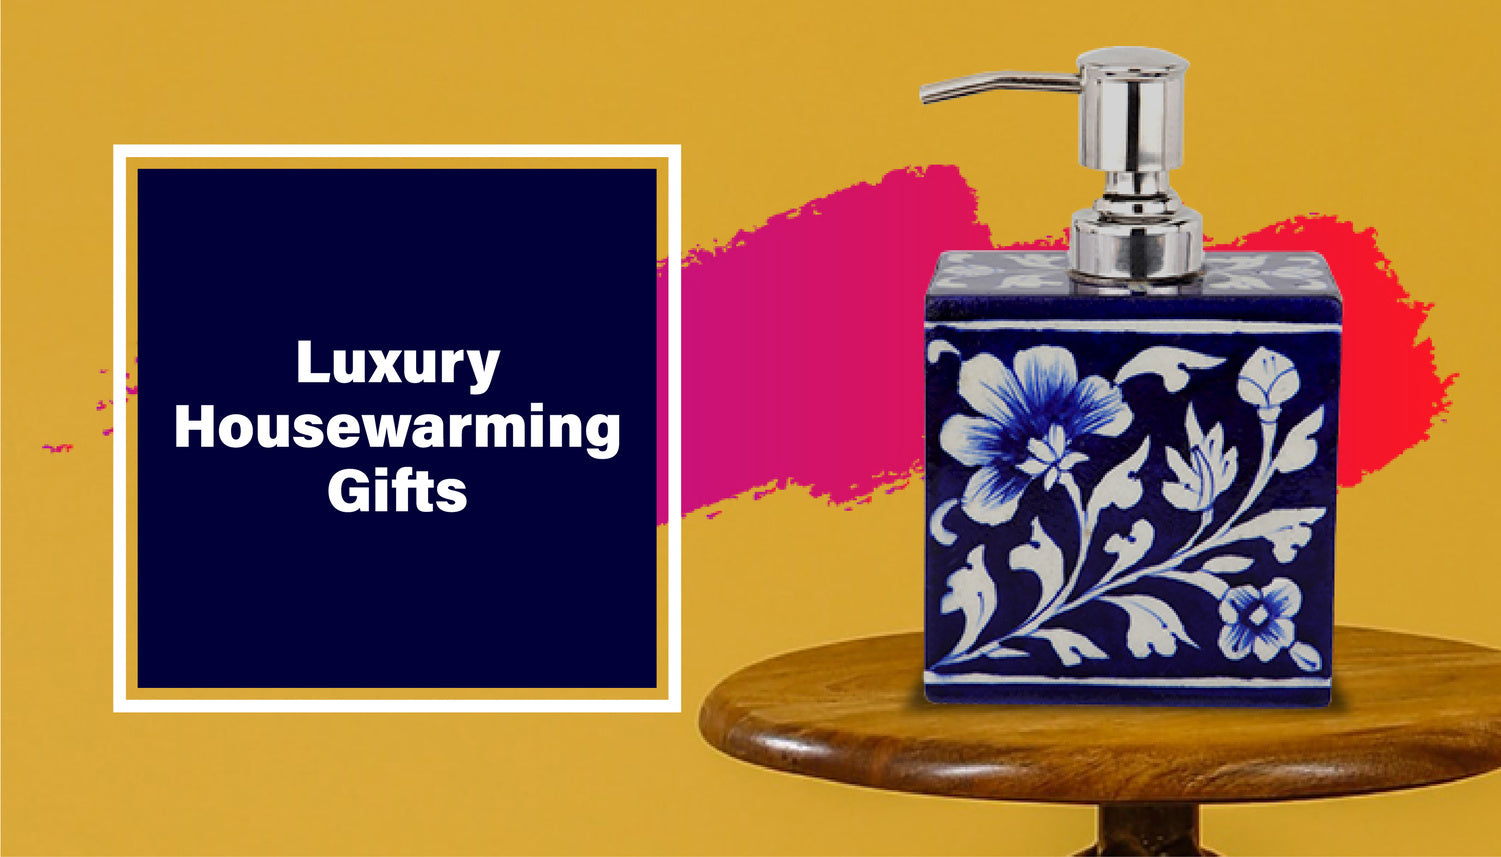 20 Luxury Housewarming Gifts: High-End Home Gift Ideas